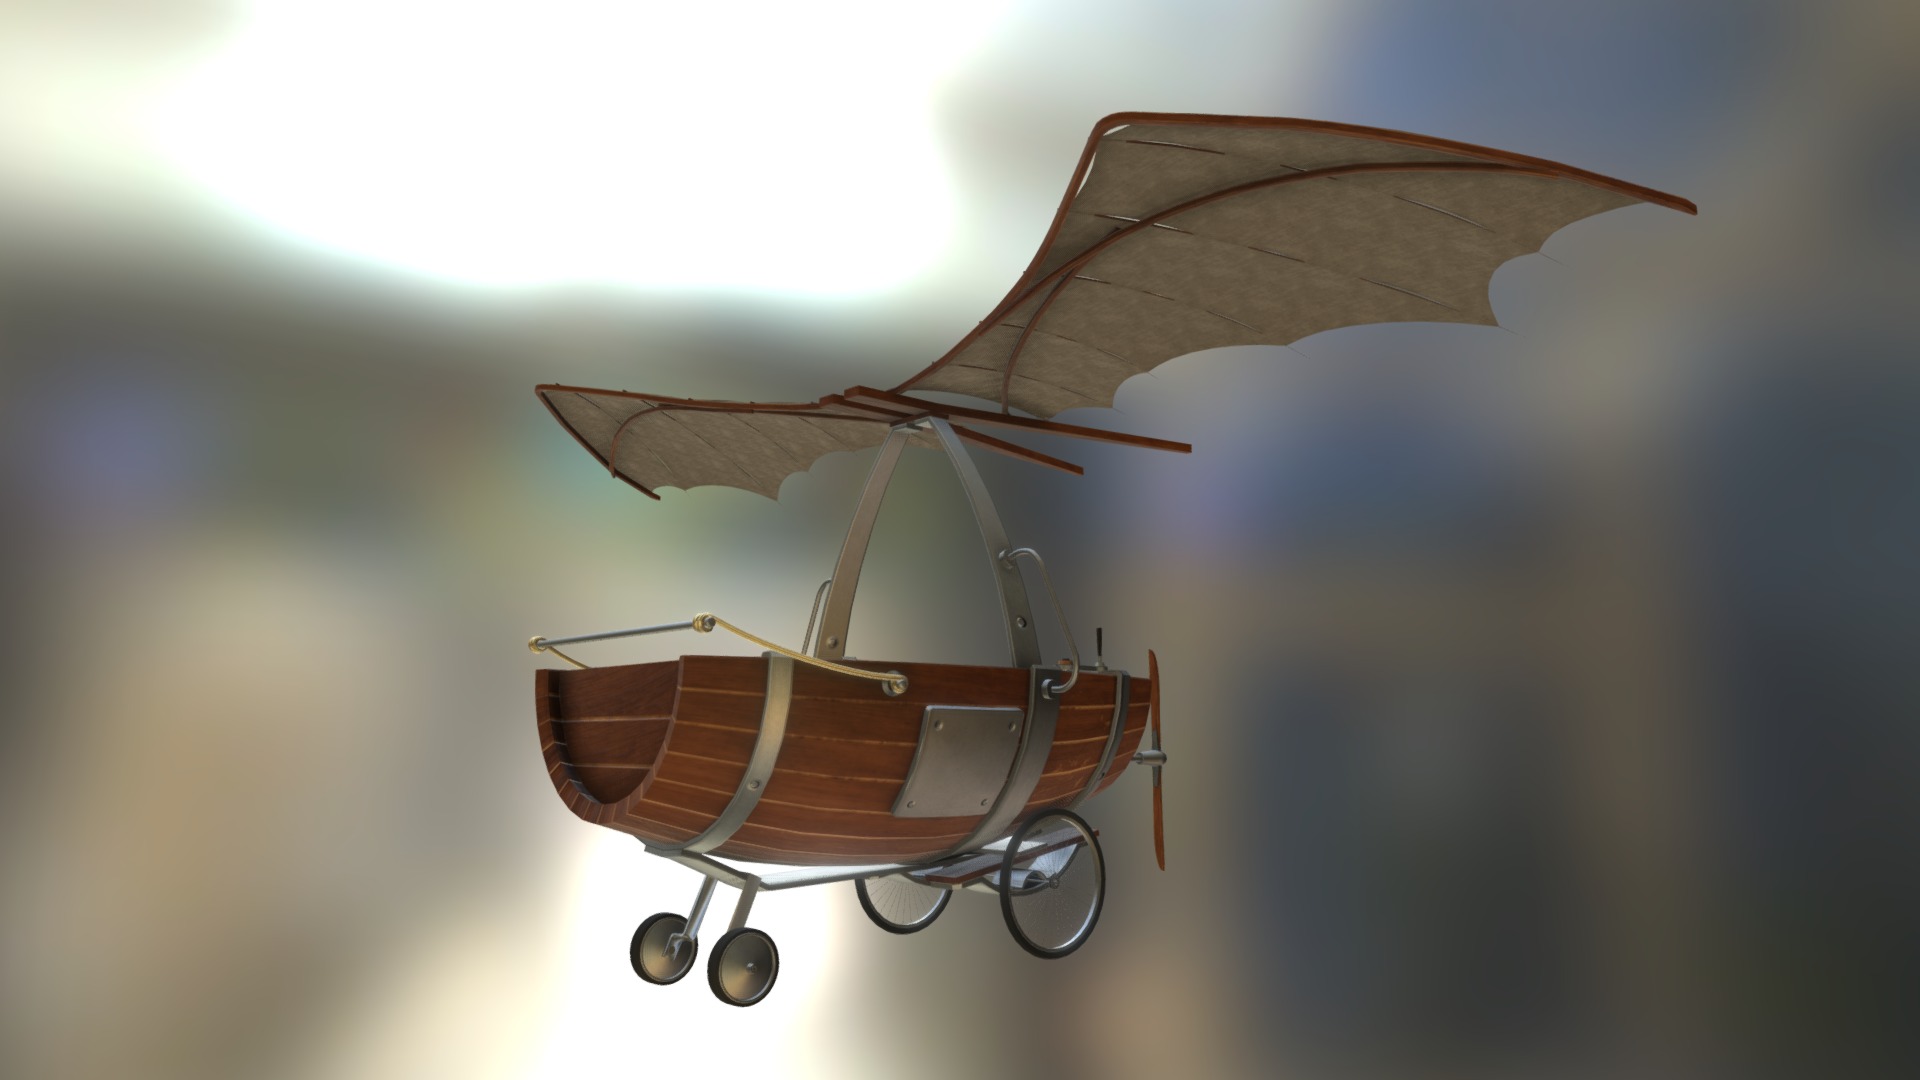 3D model Bote Volador - This is a 3D model of the Bote Volador. The 3D model is about a model of a plane.